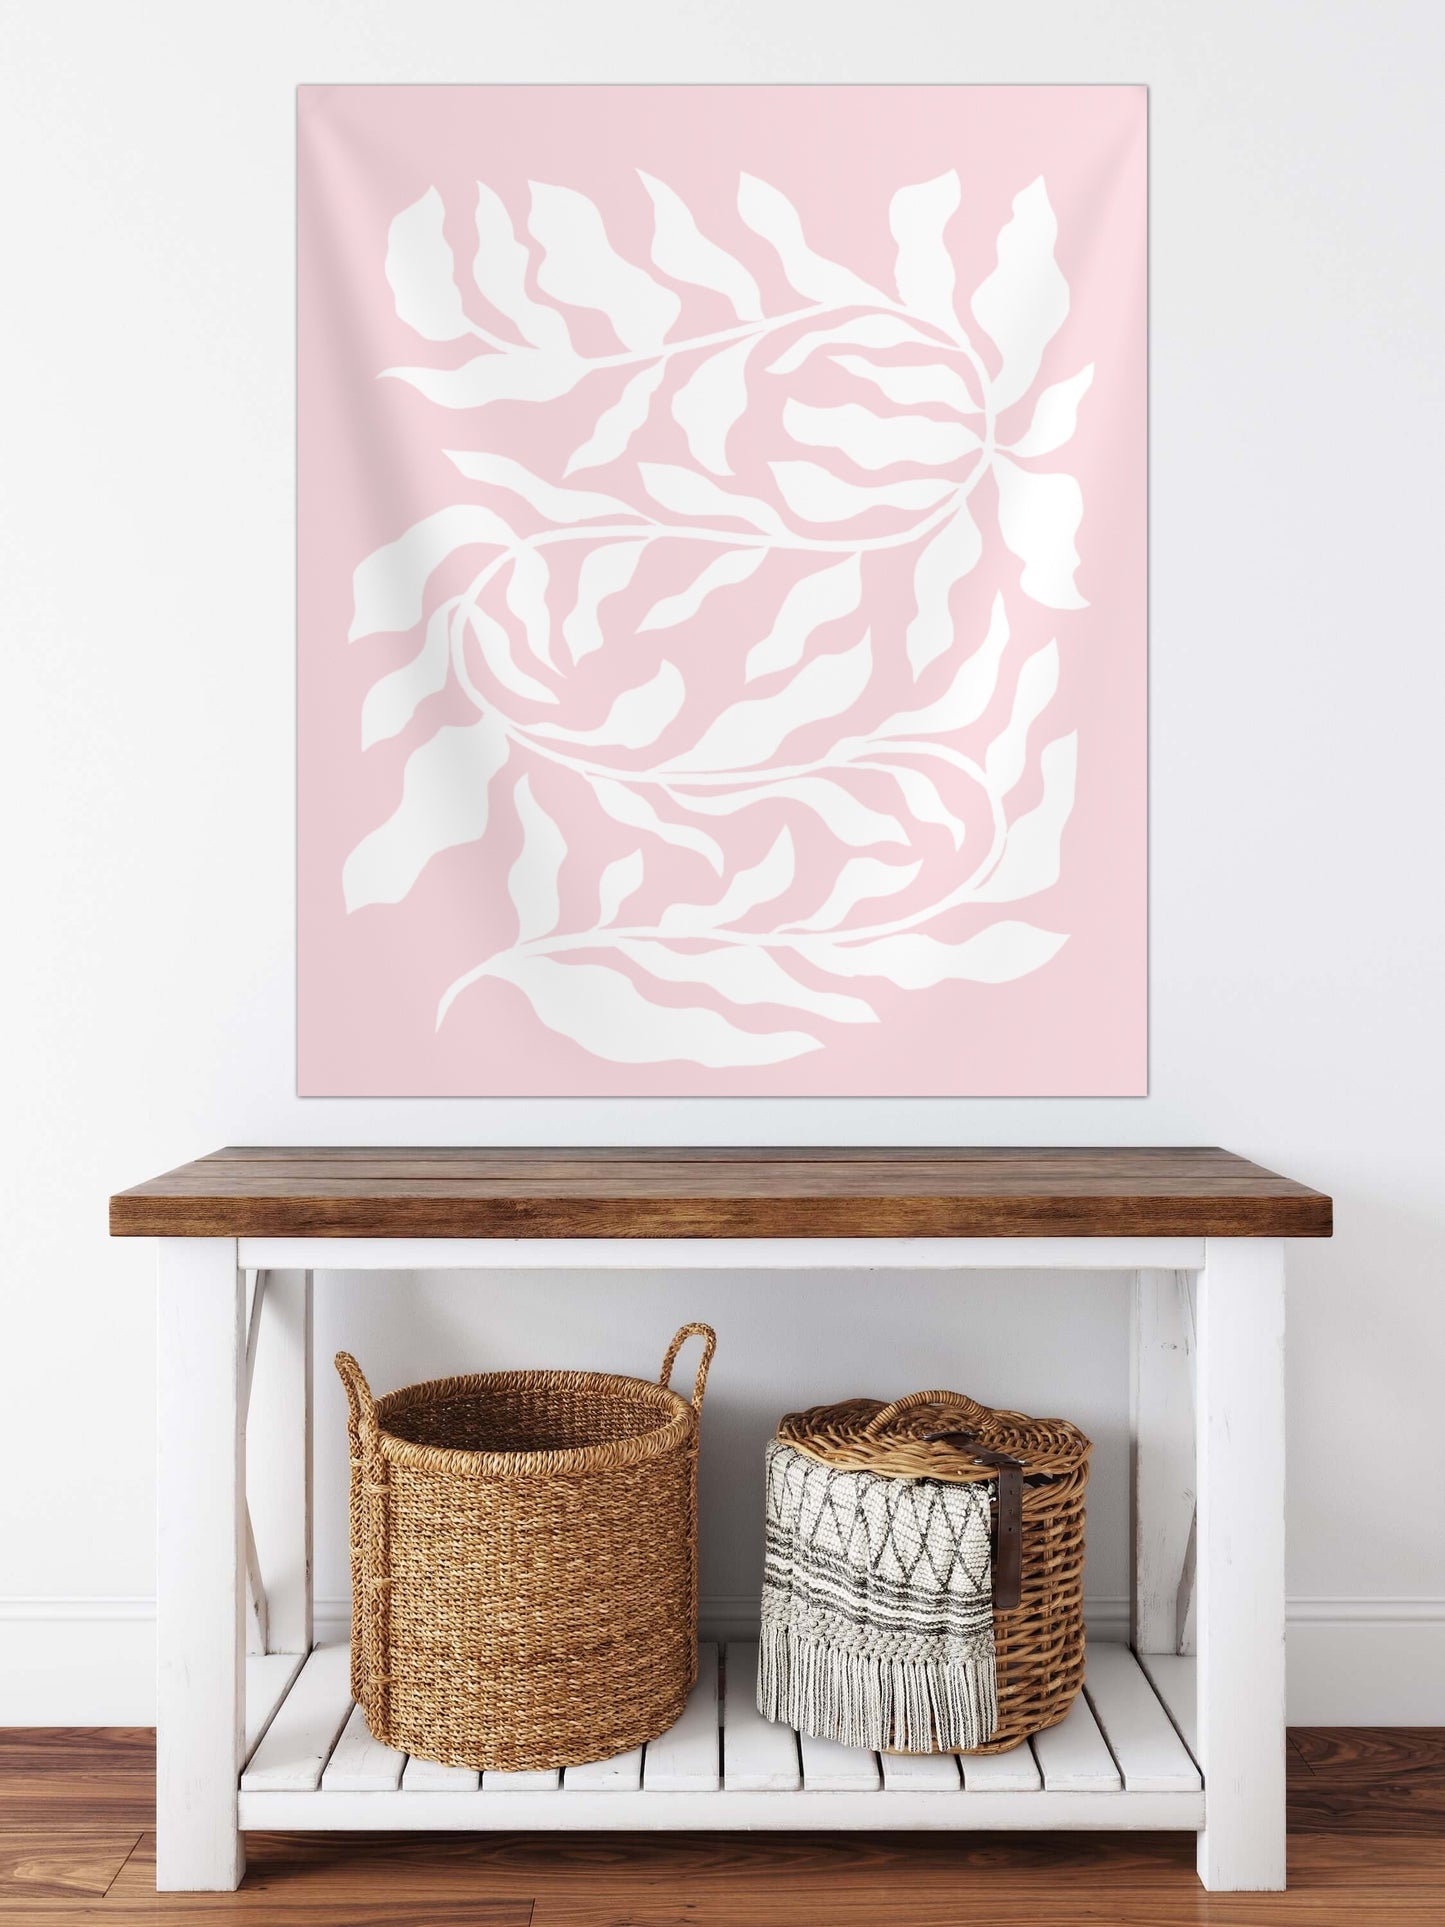 Pink Wall Tapestry